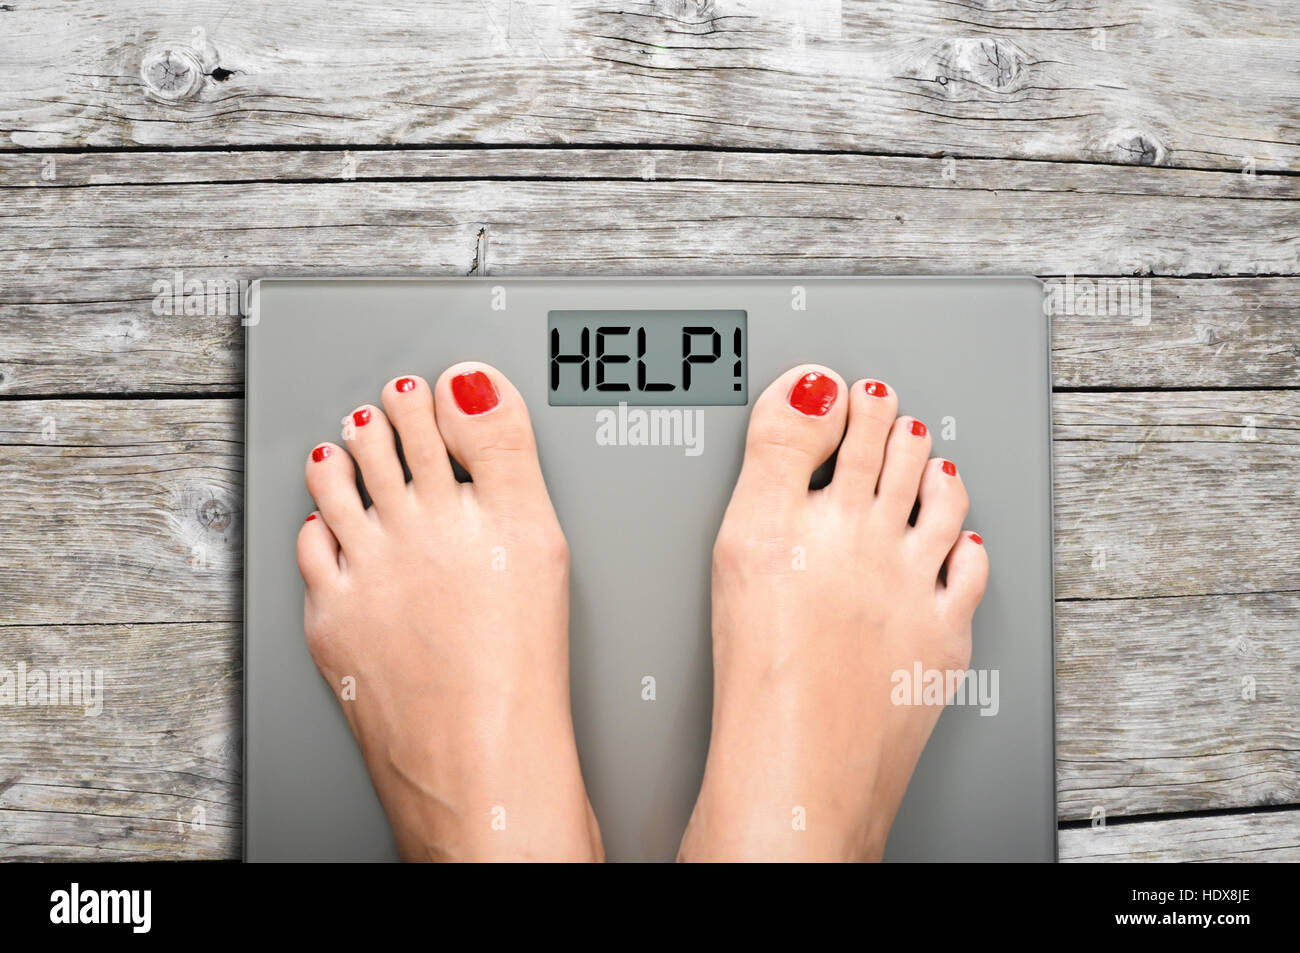 https://c8.alamy.com/comp/HDX8JE/help-to-lose-kilograms-with-woman-feet-stepping-on-a-weight-scale-HDX8JE.jpg